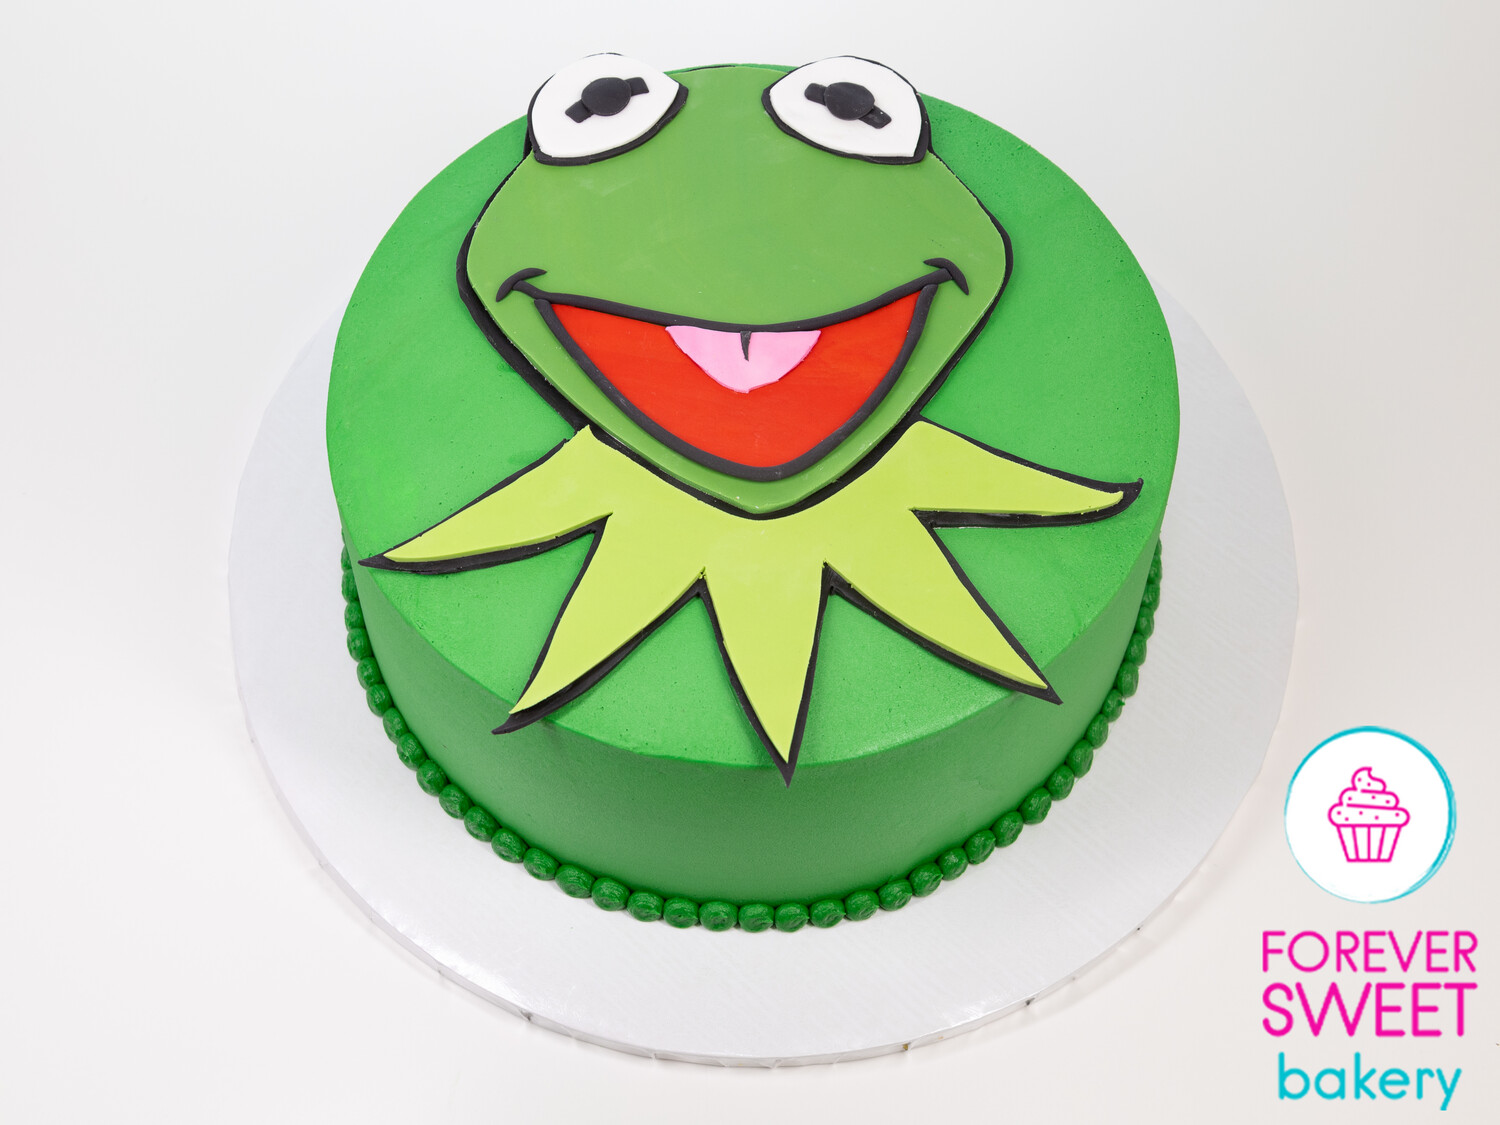 Kermit the Frog Face Cake